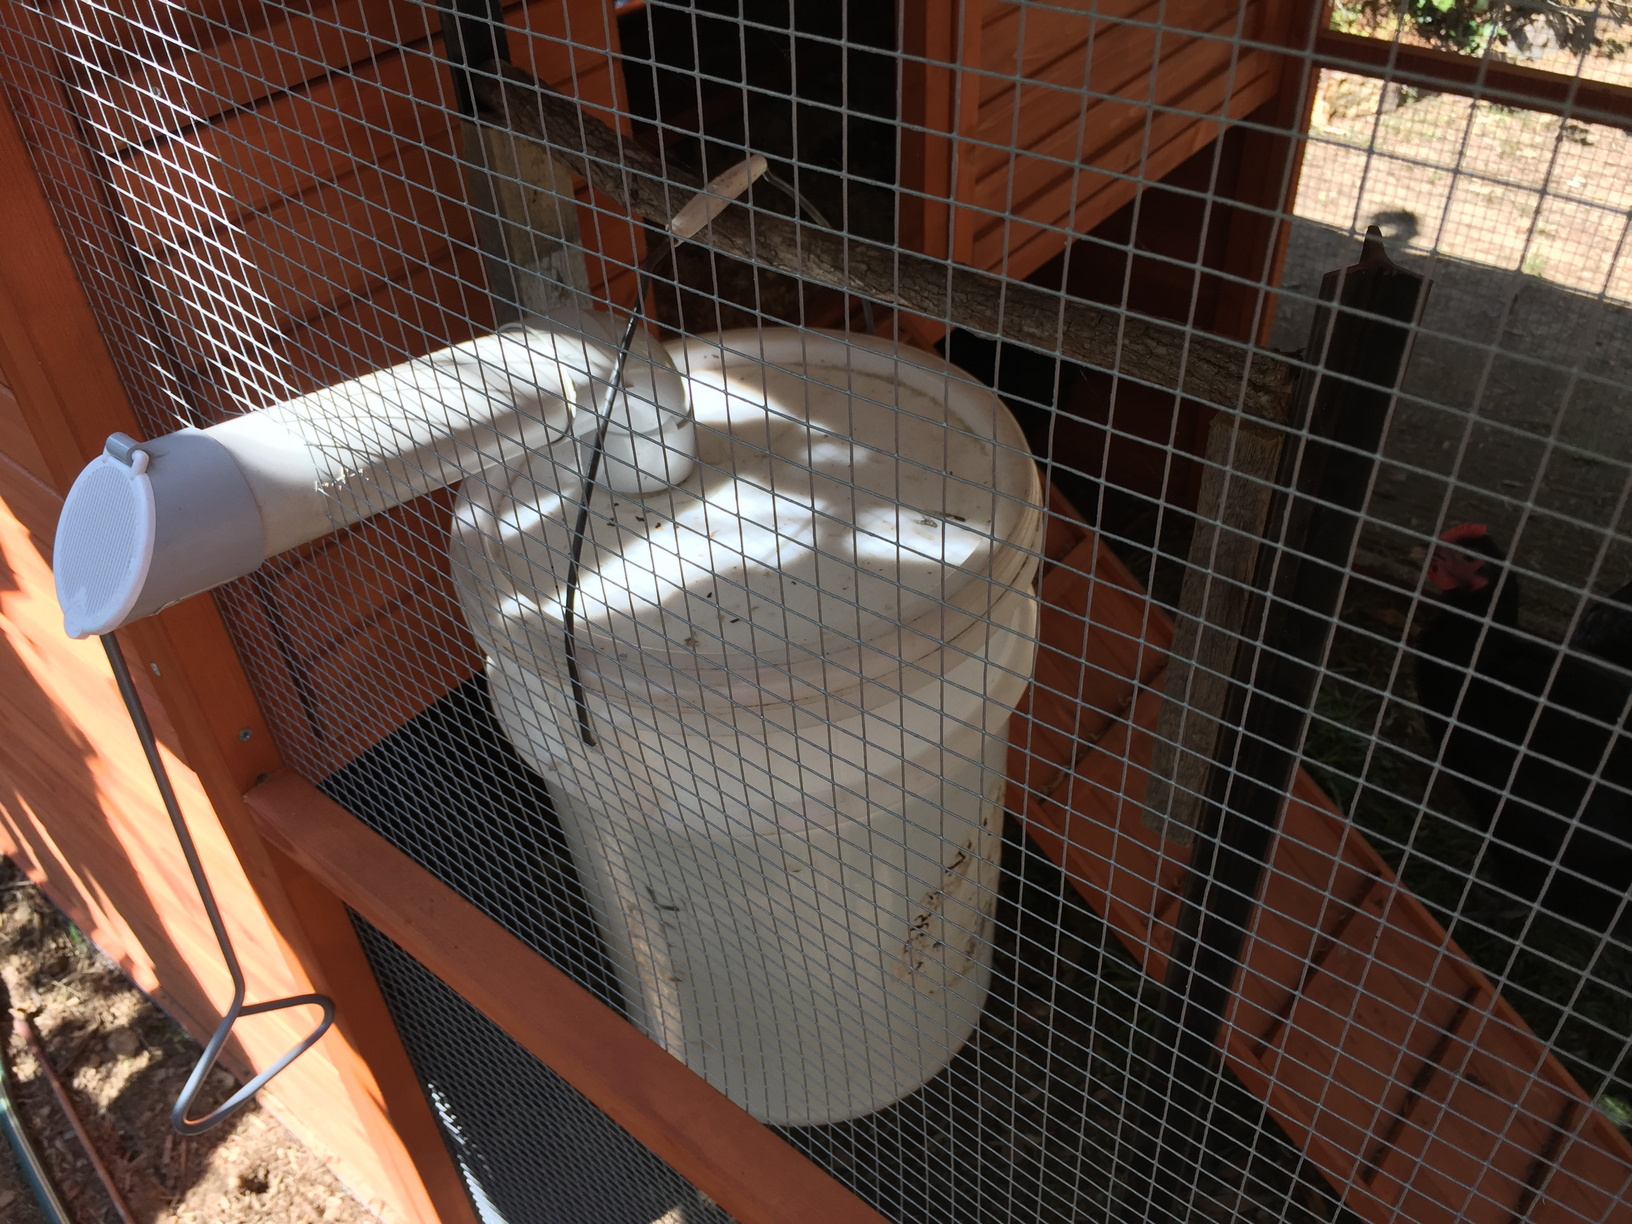 This is how you fill the water bucket from outside the cage. Lift the flap. Insert hose. Just like filling a car.